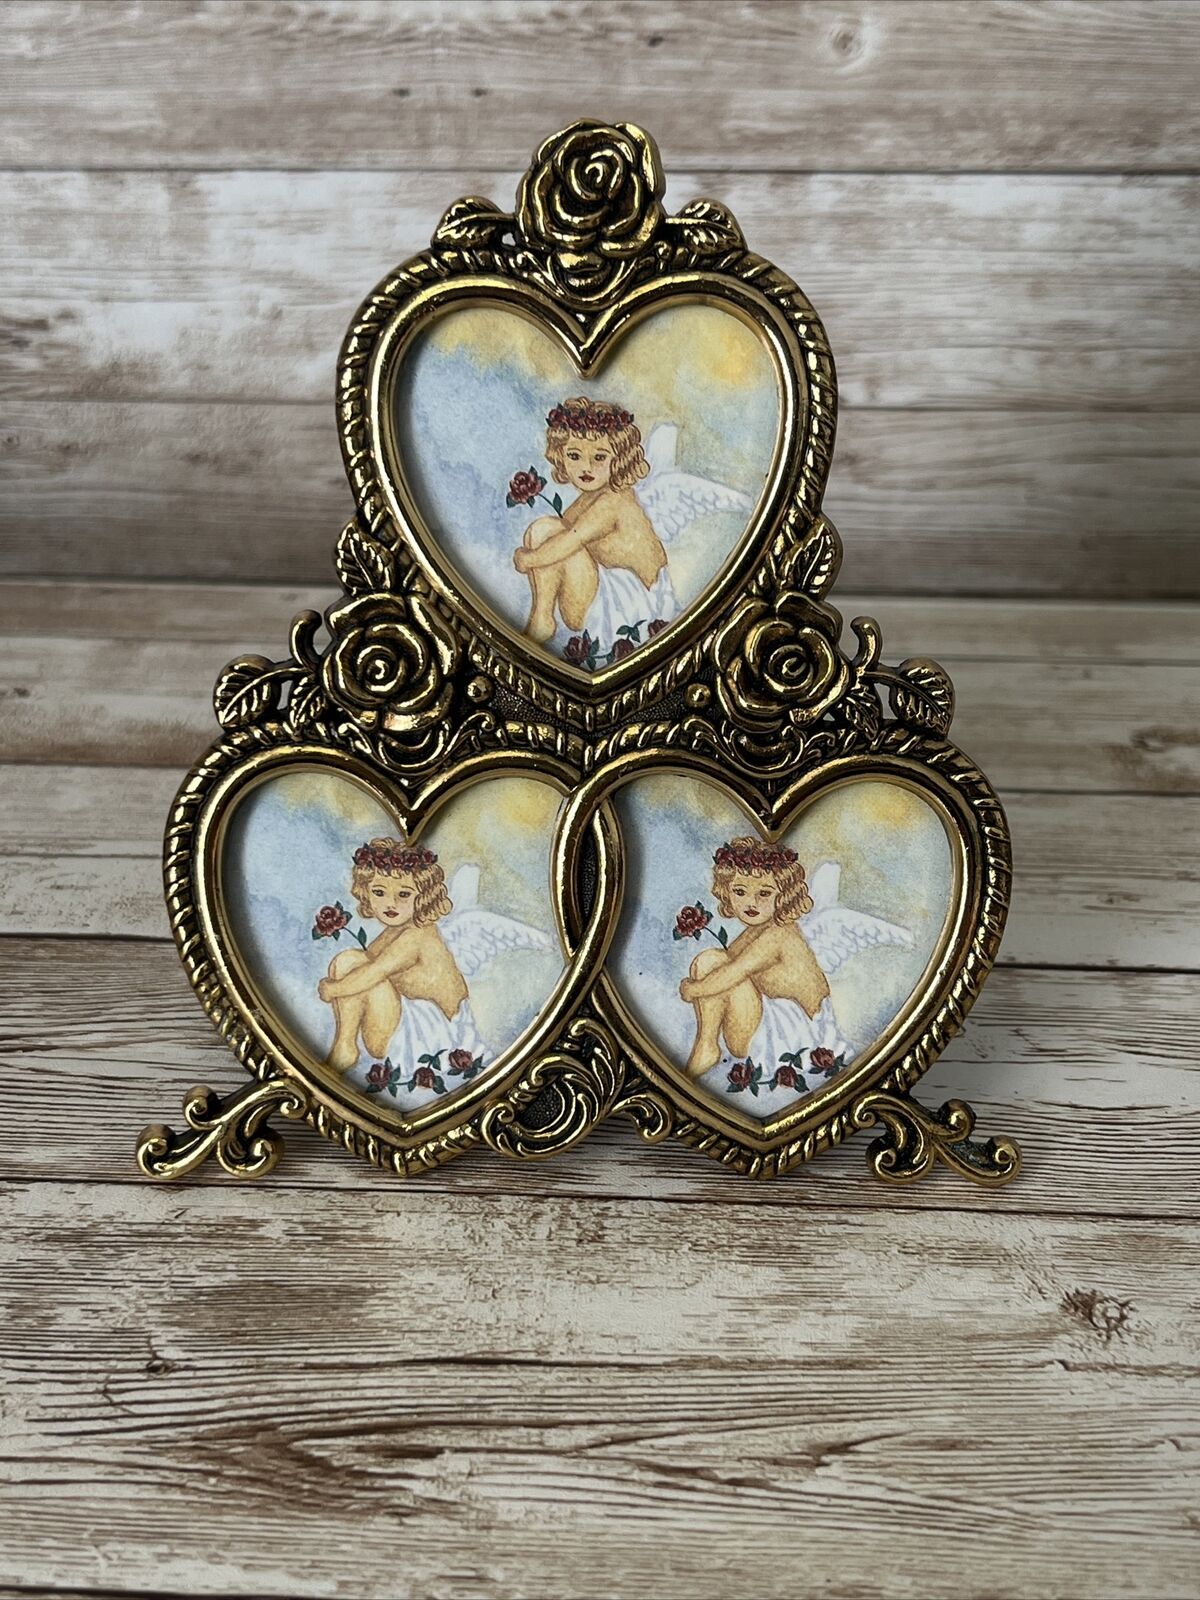 Vintage Gold Tone Rose Triple Heart Picture Photo Frame Taiwan Shabby Chic